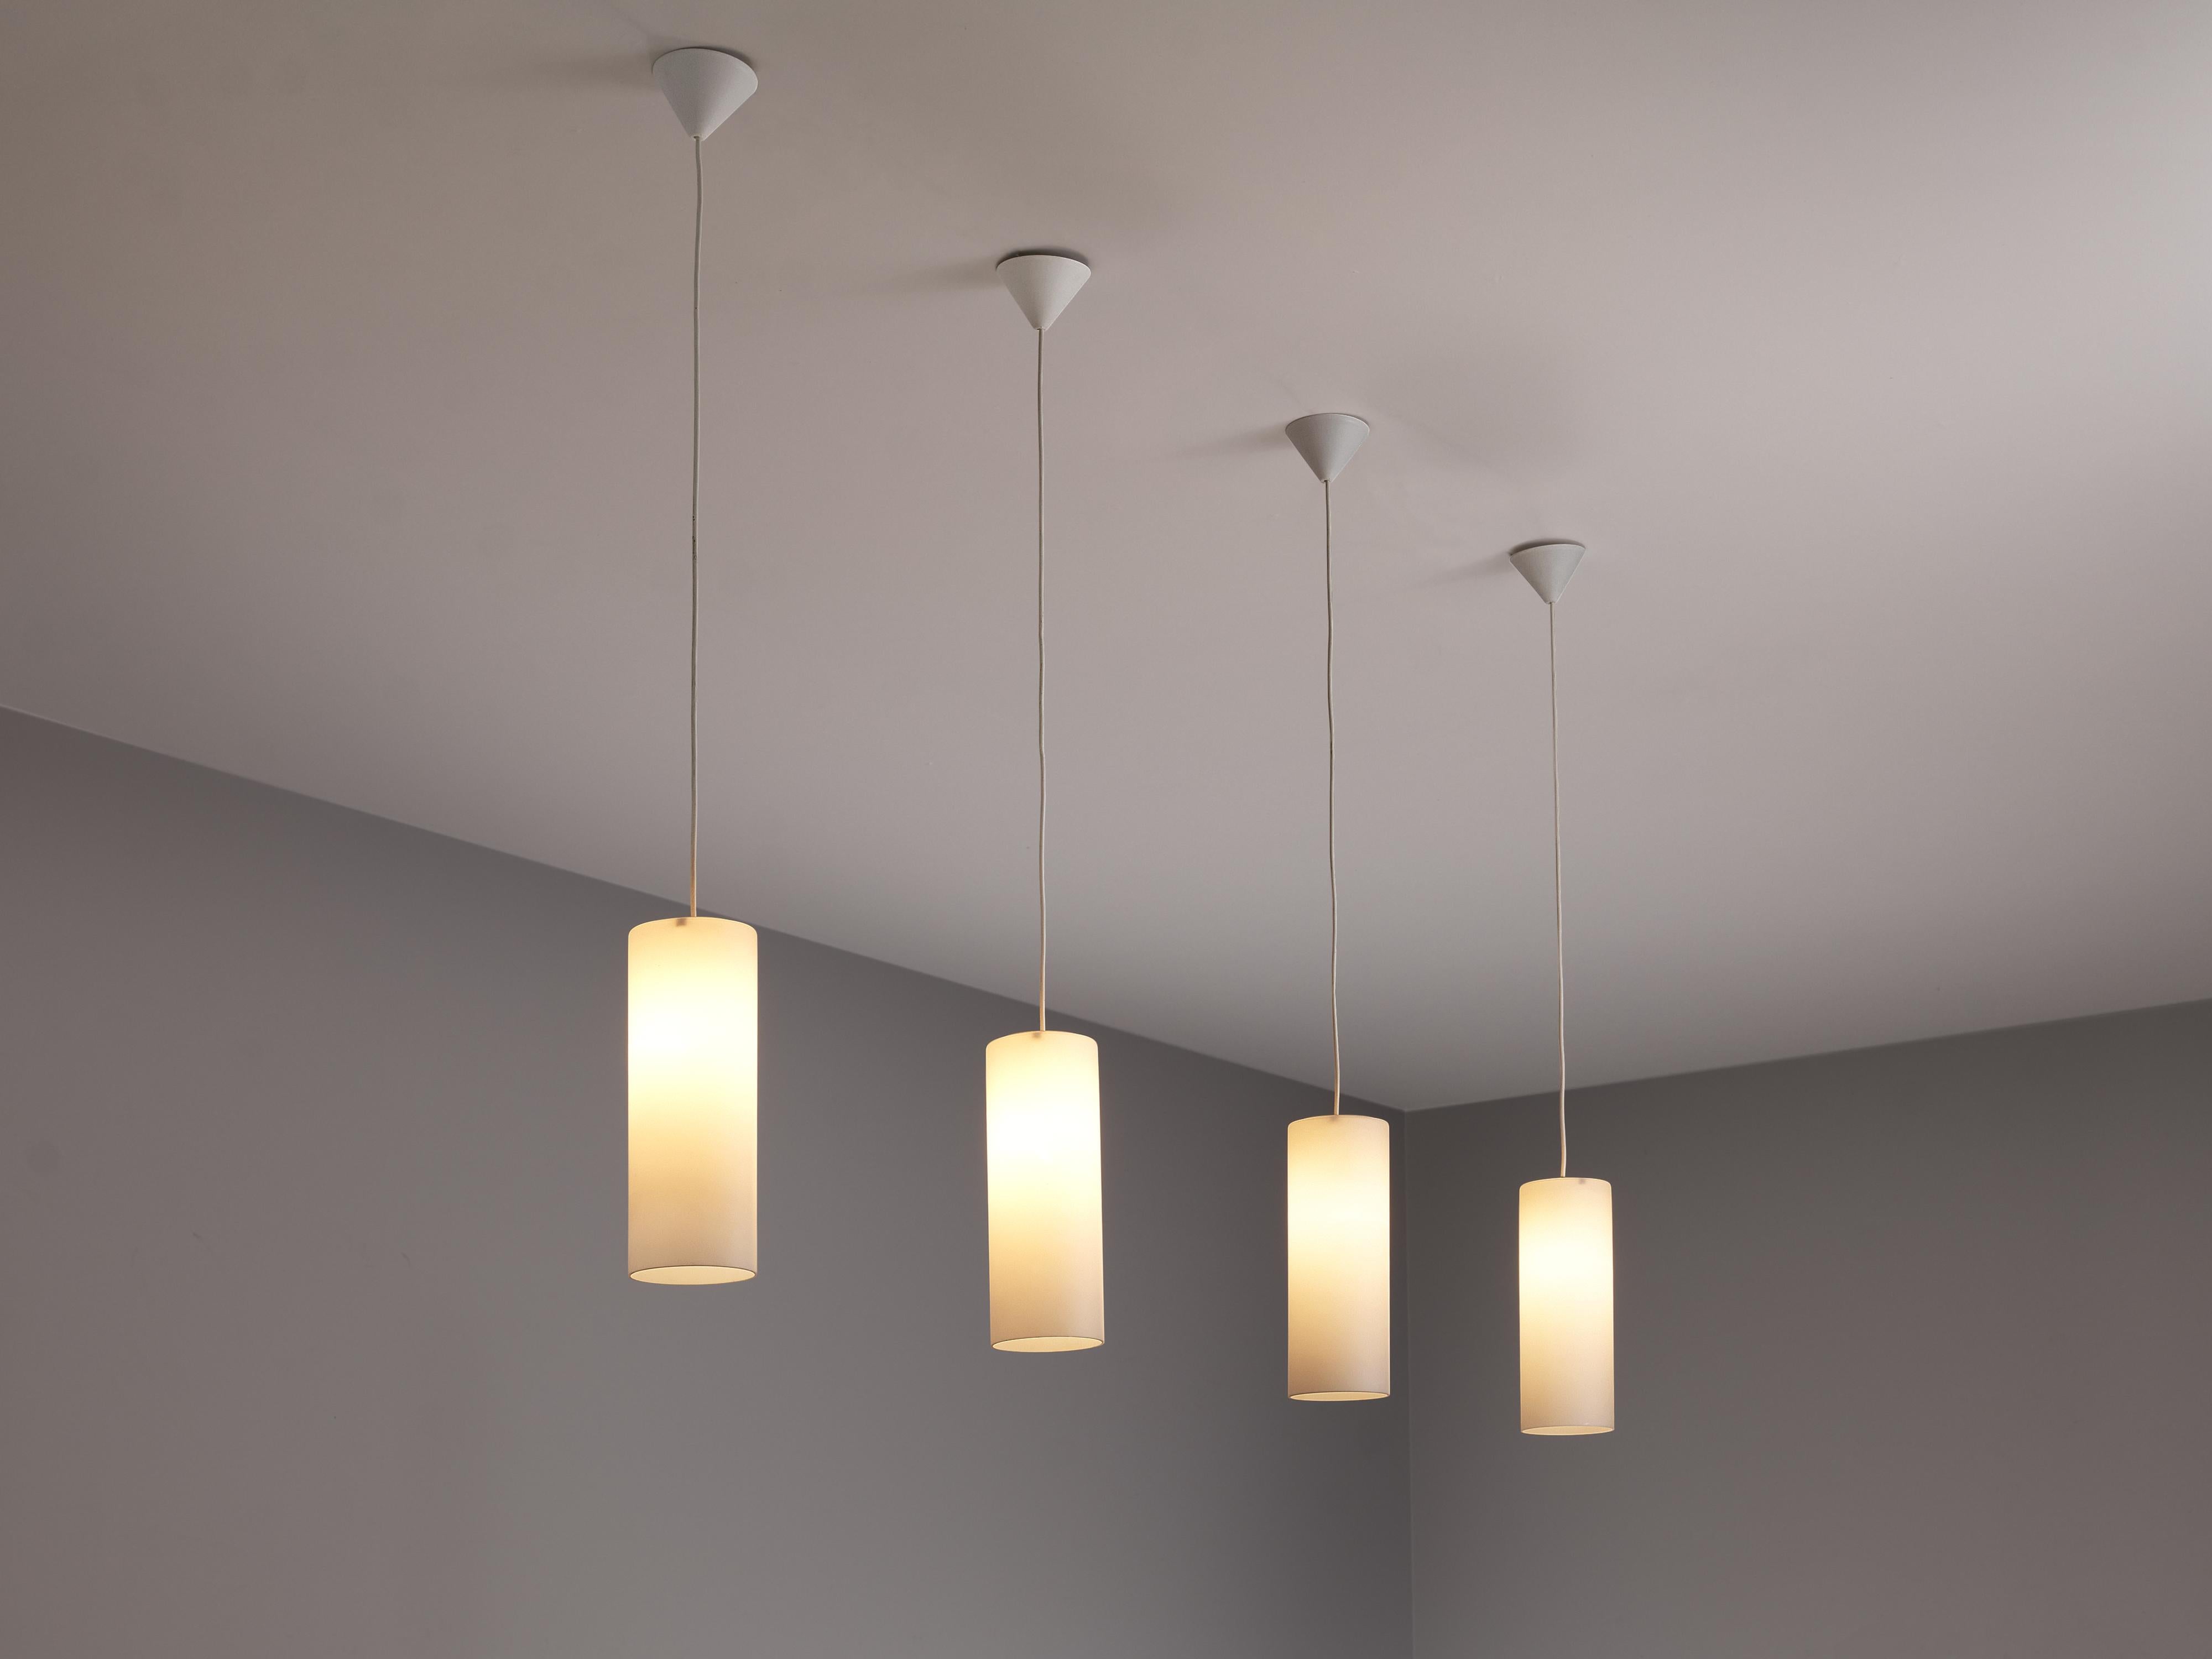 Pendants, matted glass, Europe, 1980s

With their matted glass shade in a cylindrical form, these pendants have a minimalist look. The light source creates a warm, atmospheric light. 

Please note that we have a large amount of these lamps in our